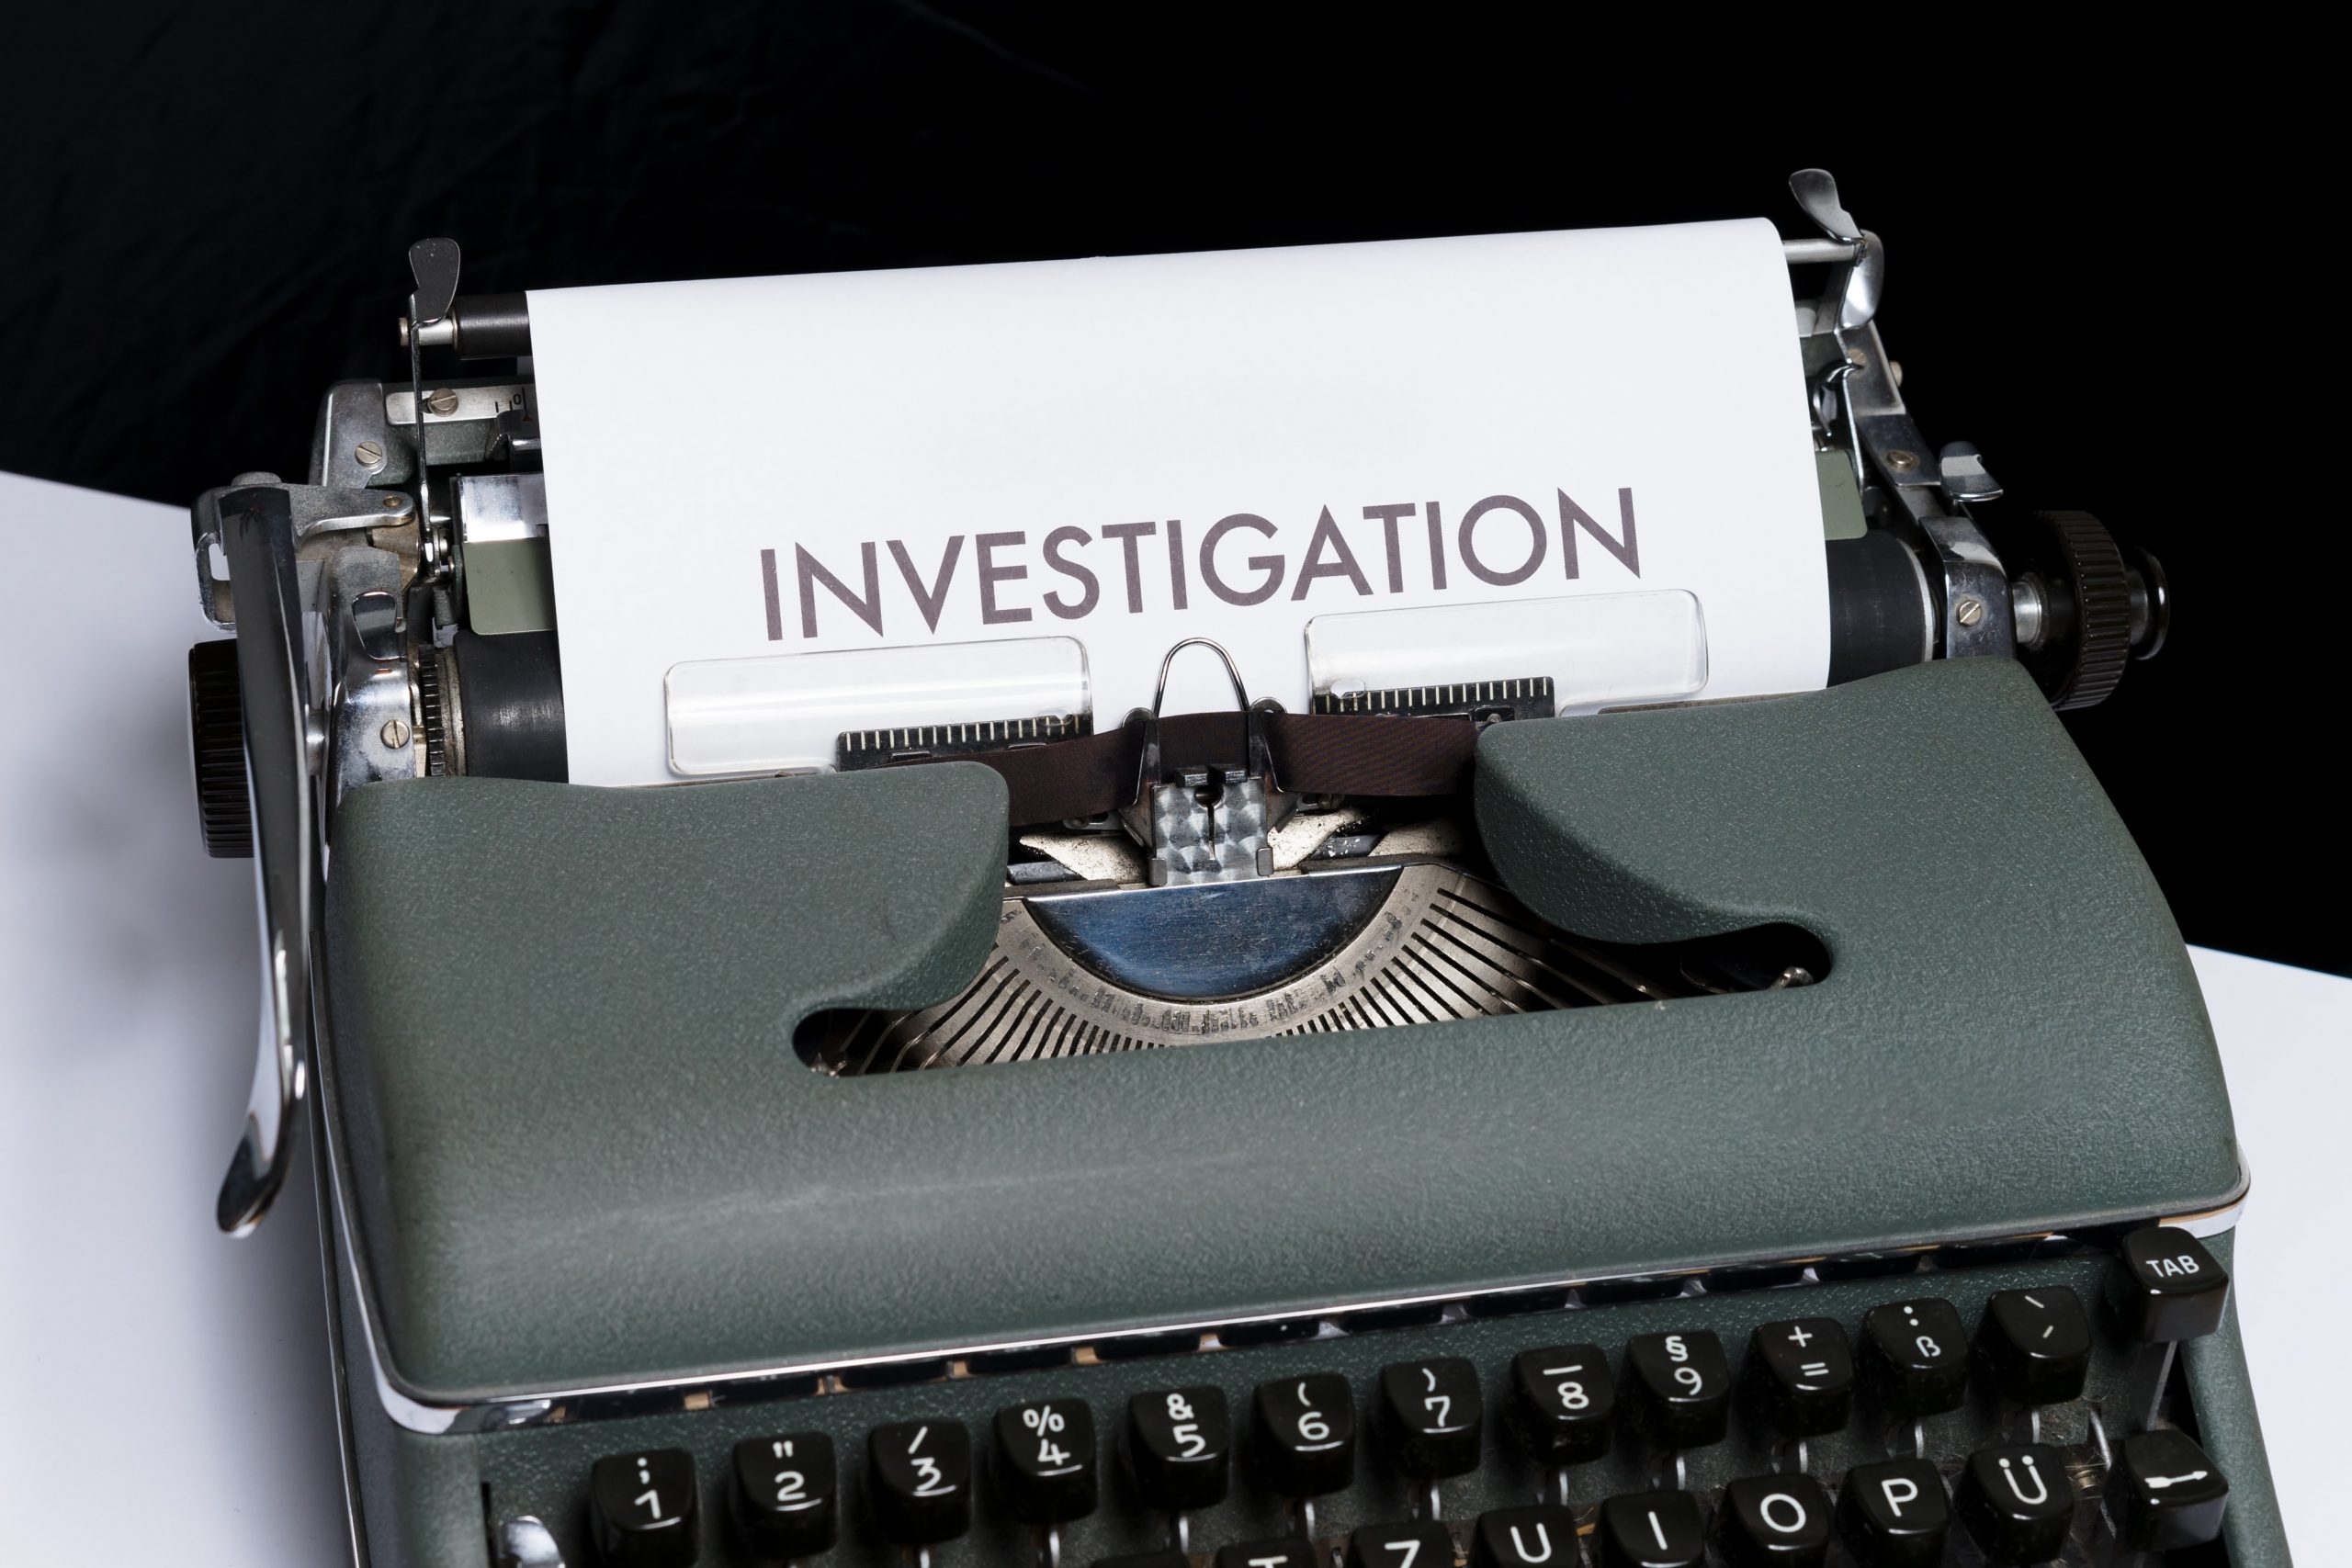 Old fashioned green, metal typewriter sitting on desk. White paper in the typewriter has the heading "Investigation" written at the top.